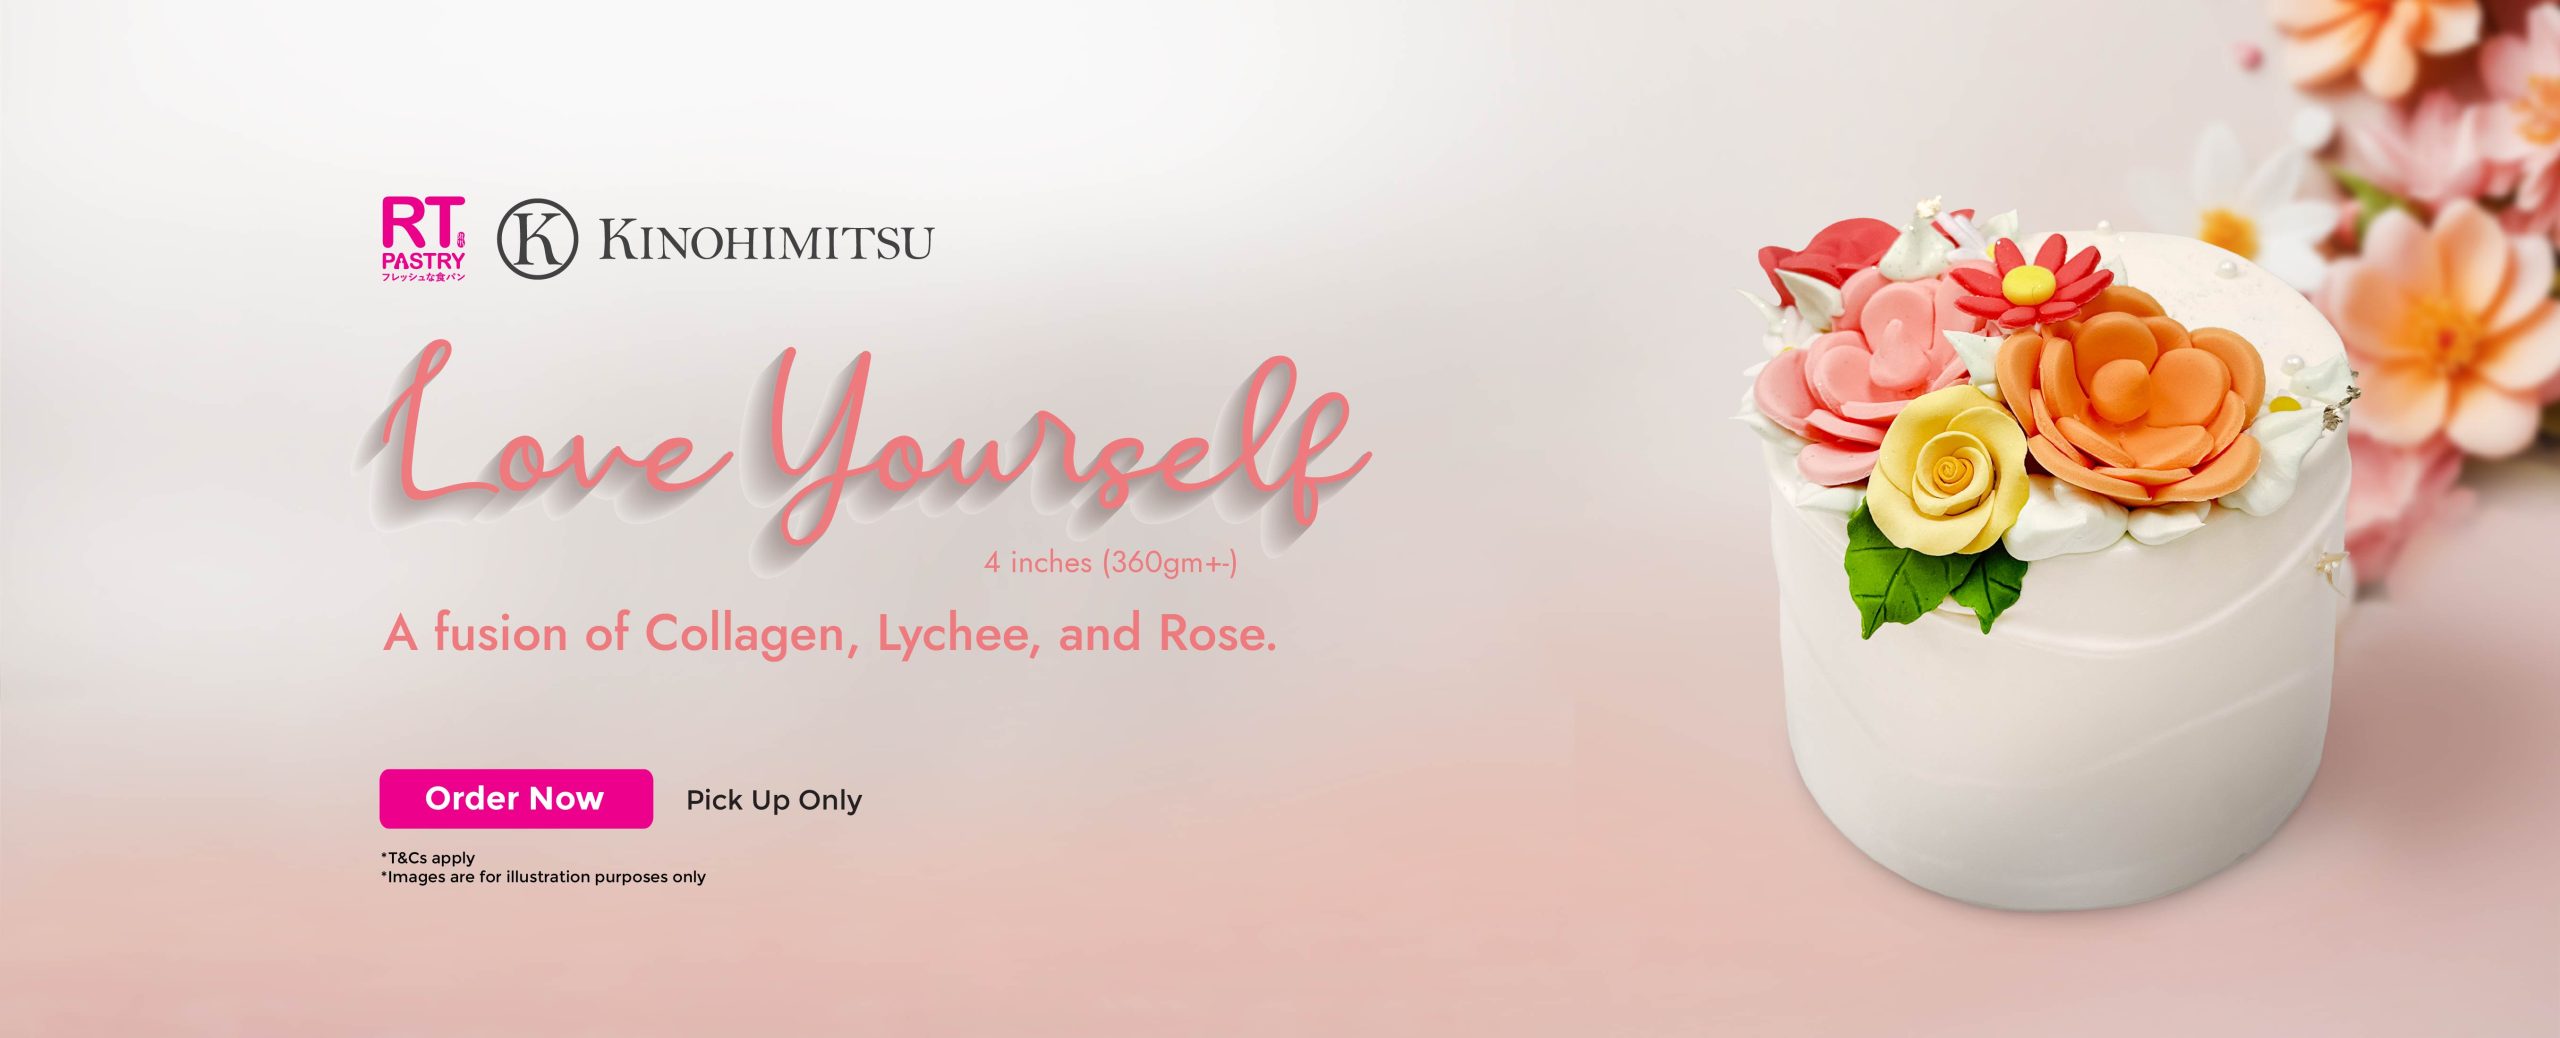 love yourself web banner-01